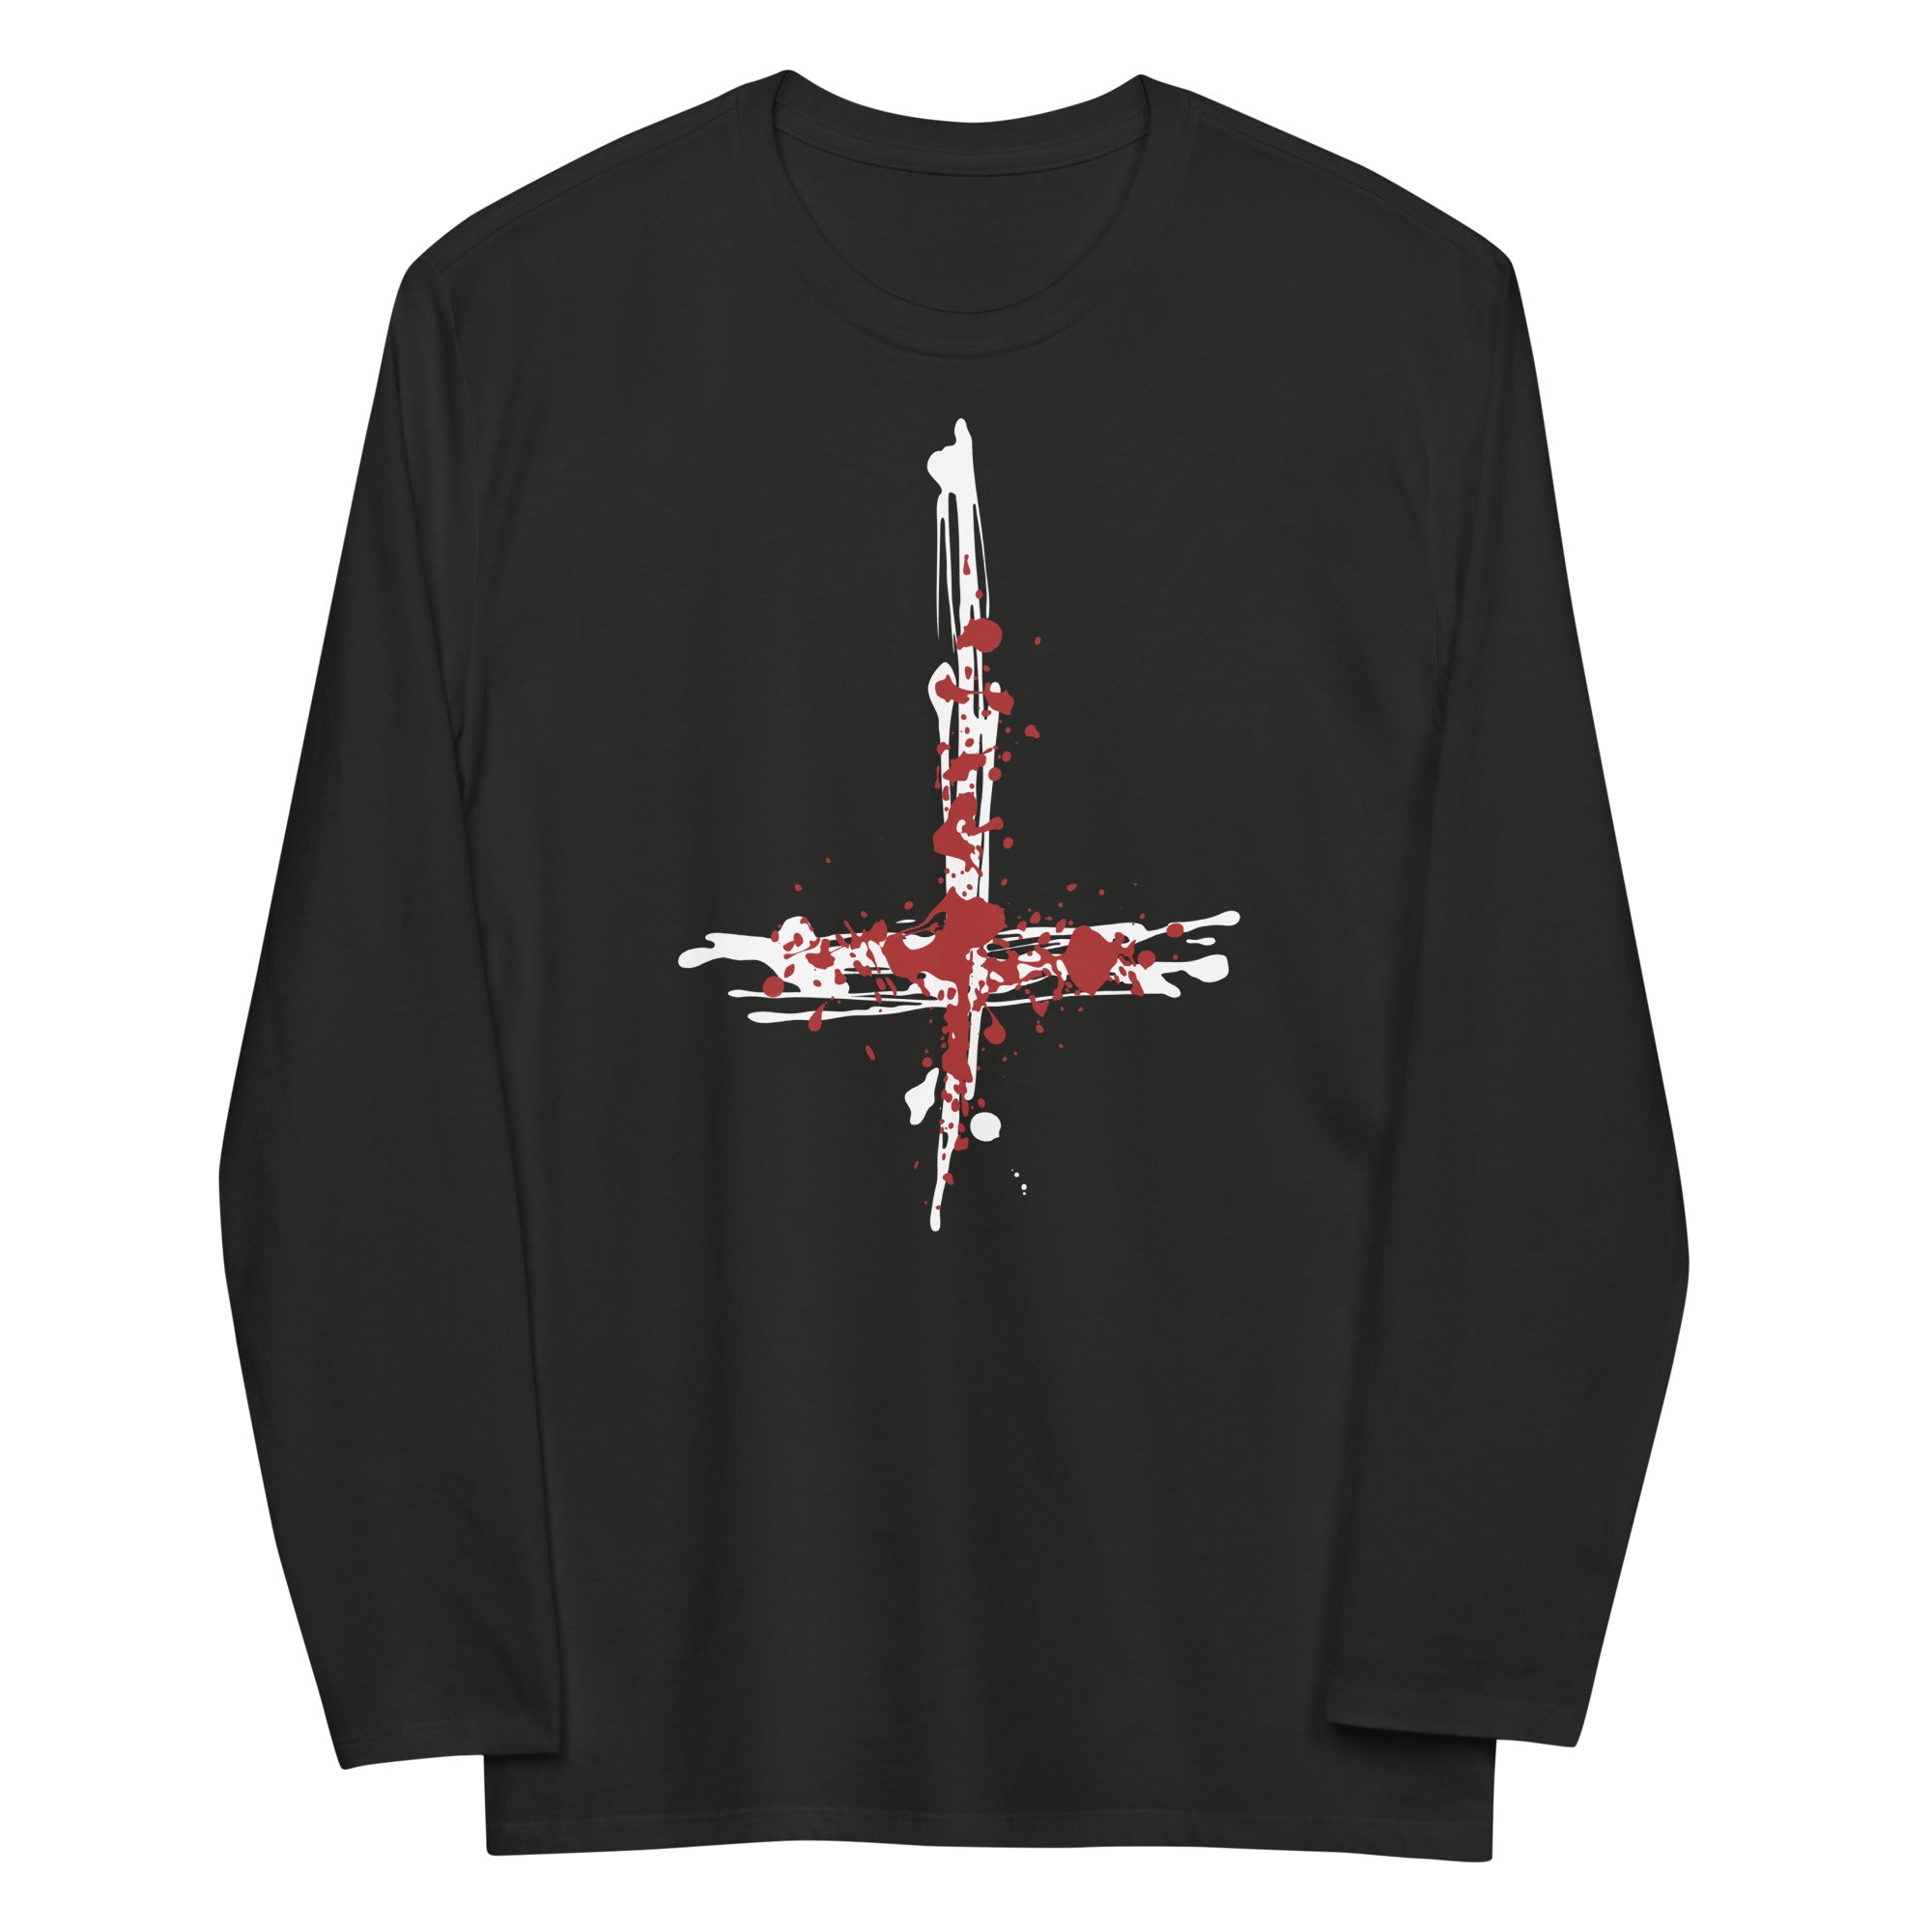 Inverted Cross Blood of Christ Women's fashion long sleeve shirt - Edge of Life Designs